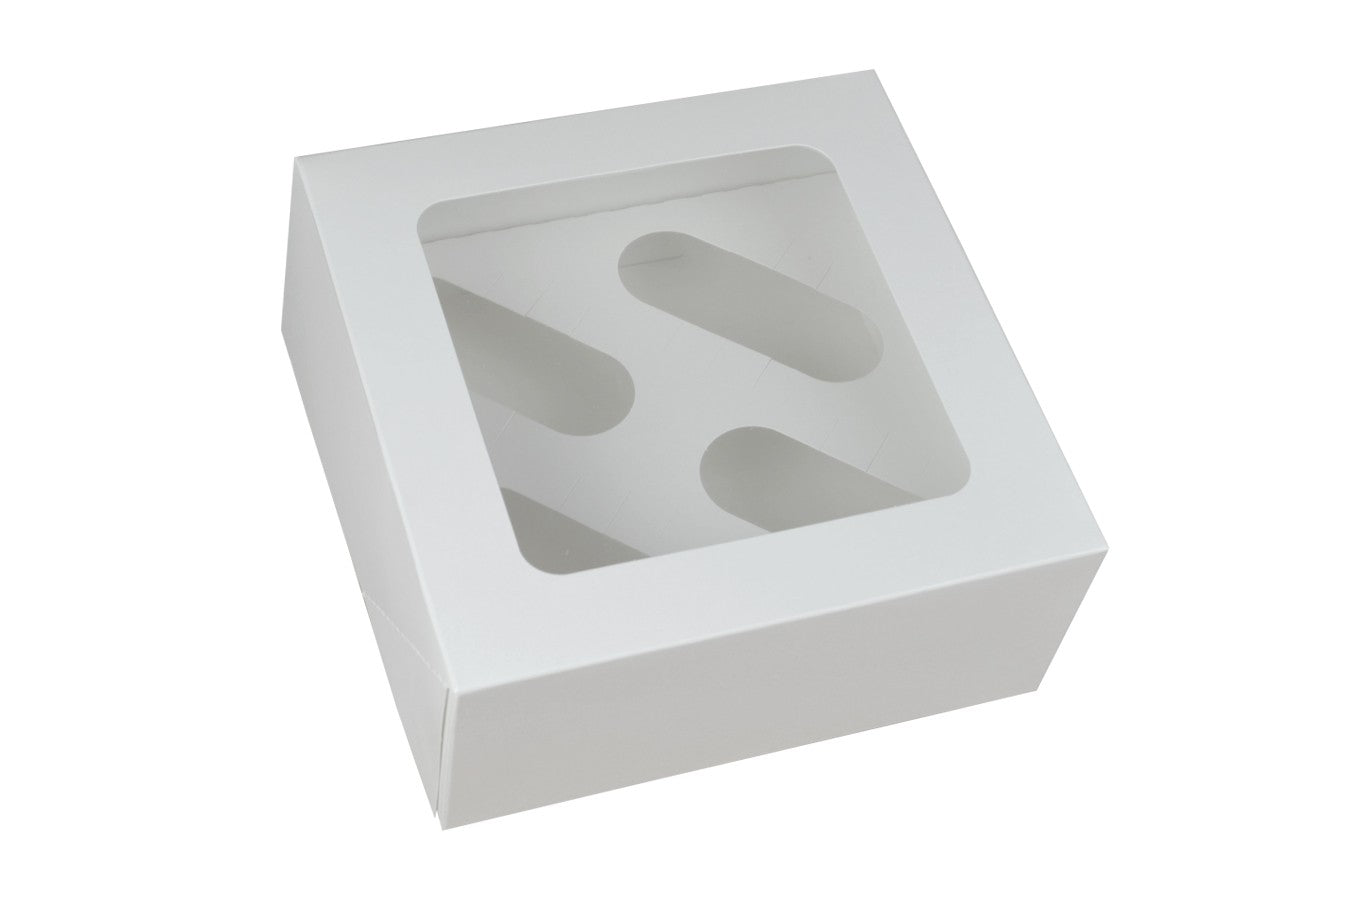 25 x White Cupcake Boxes 4 holder with Inserts - thecakeboxes